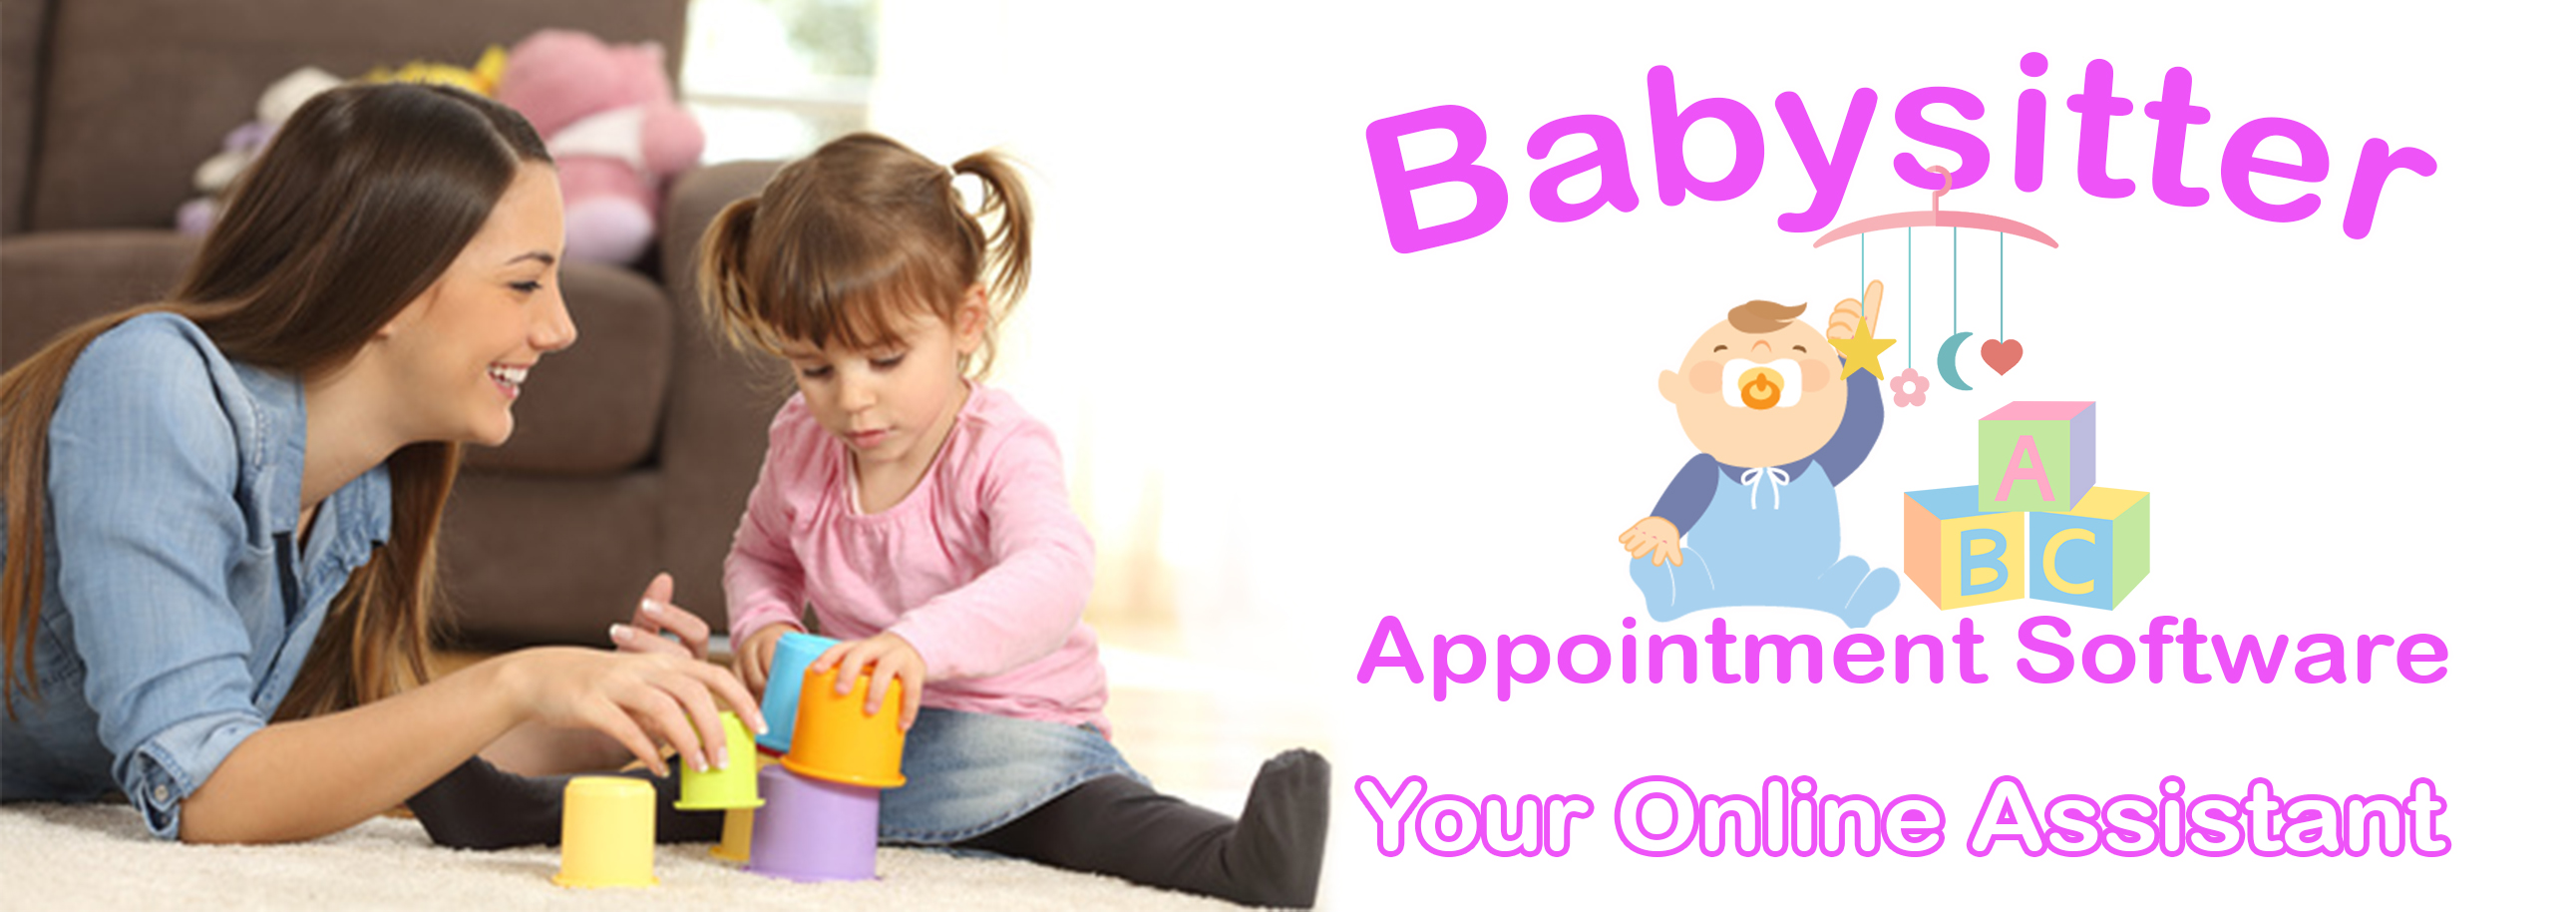 babysitter-appointment-software